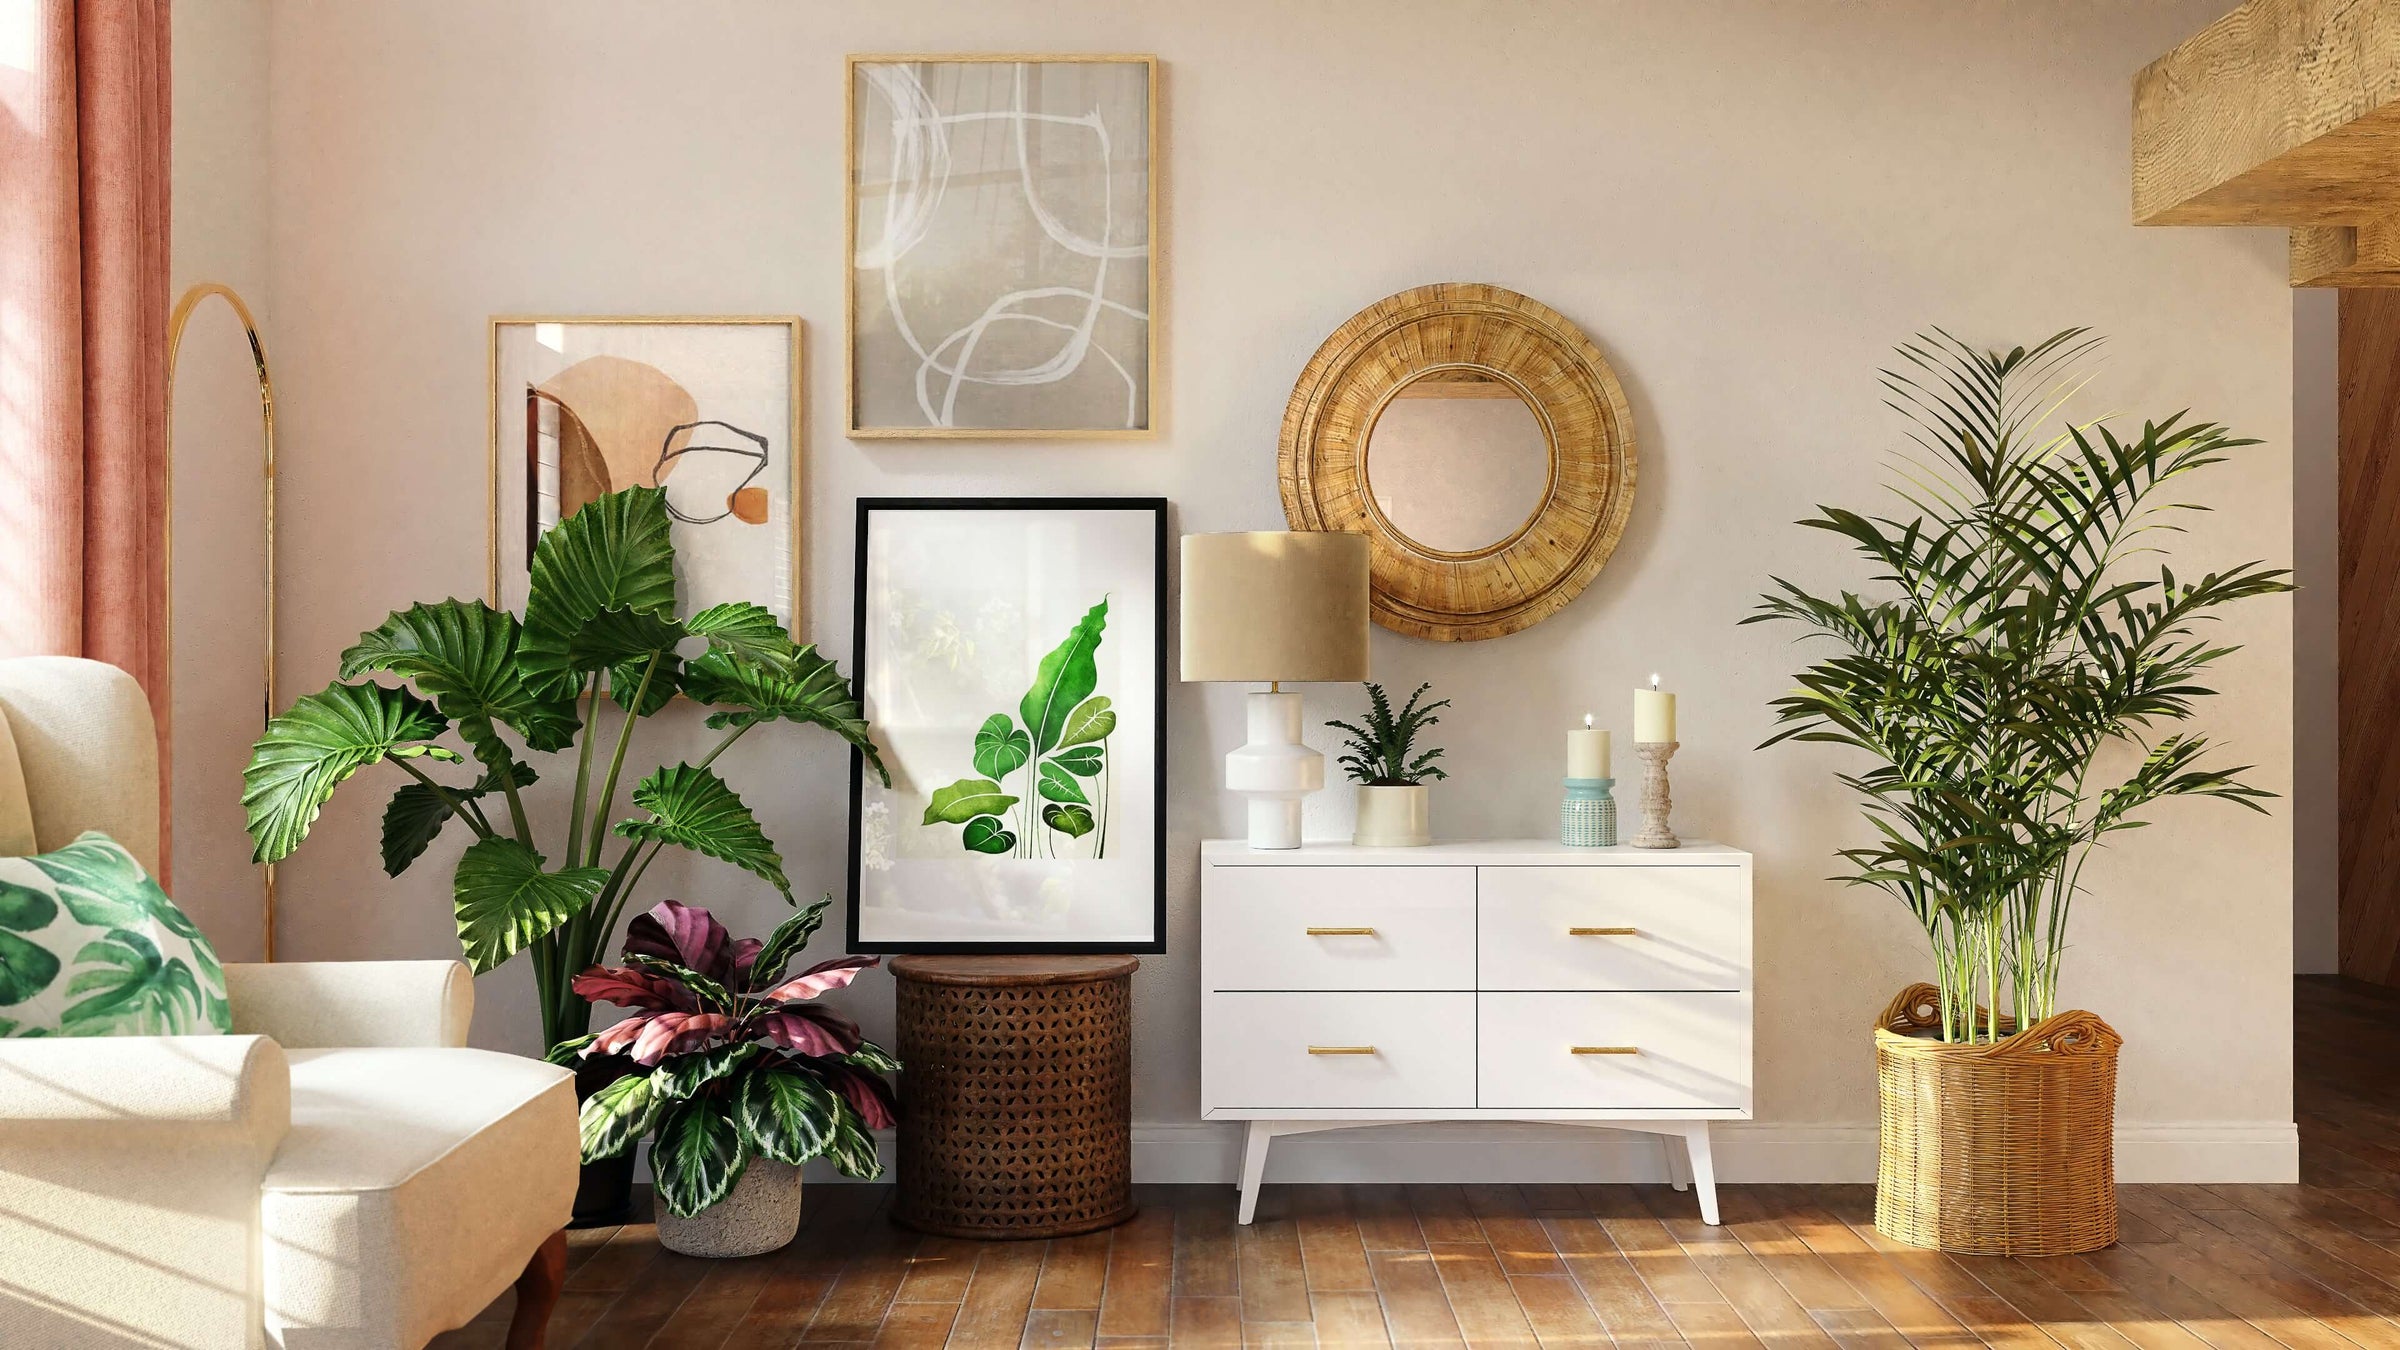 Timeless, cozy living room filled with plants, vases, artwork, and home décor